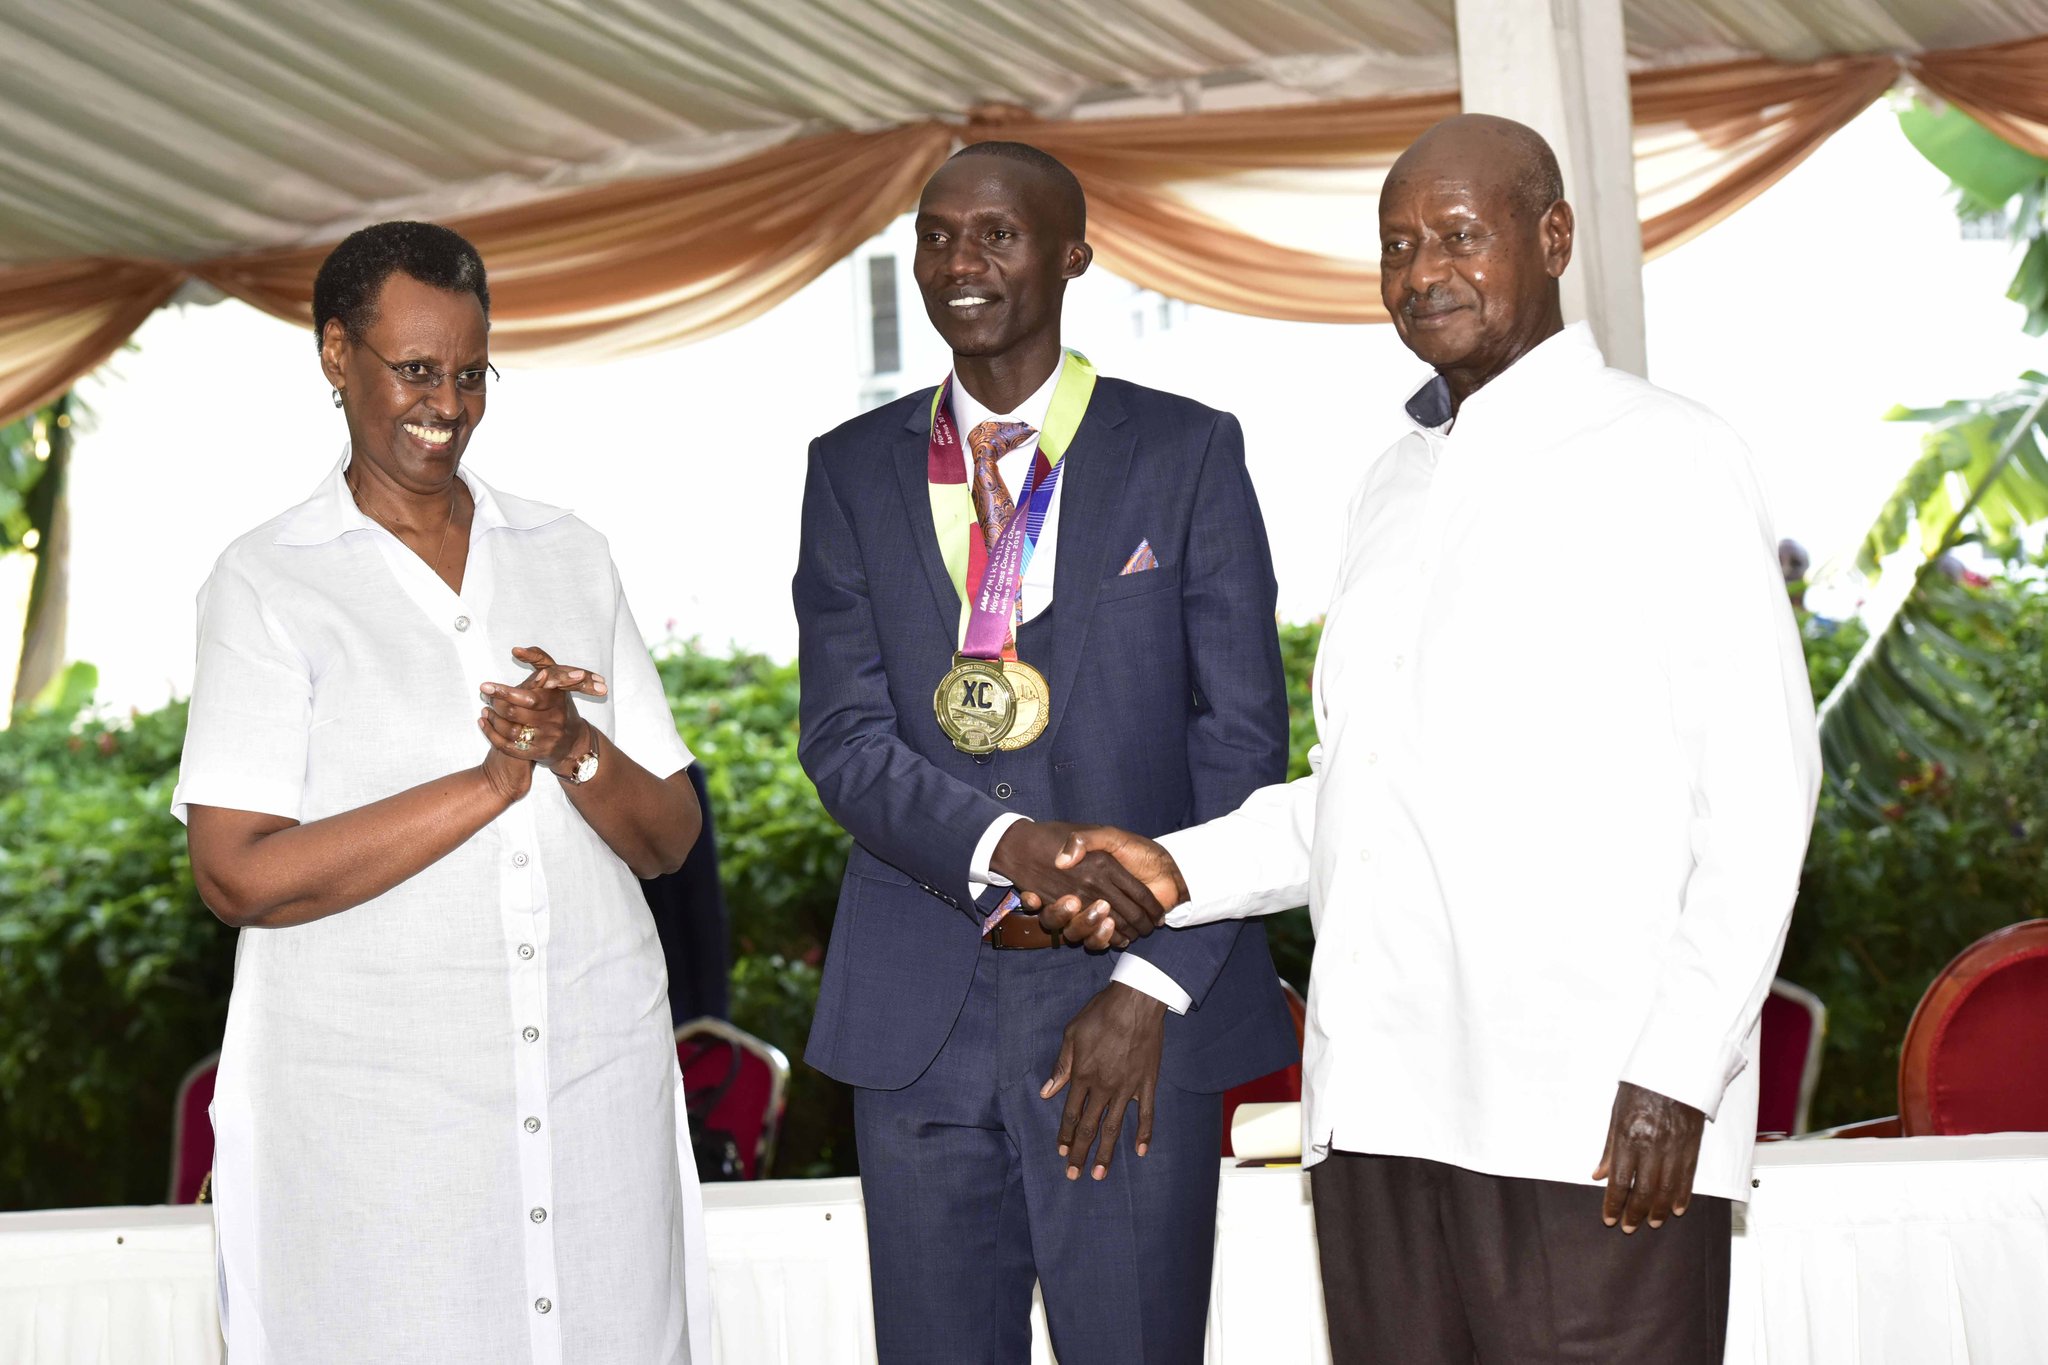 Yesterday, President Museveni hosted over 400 sportspeople